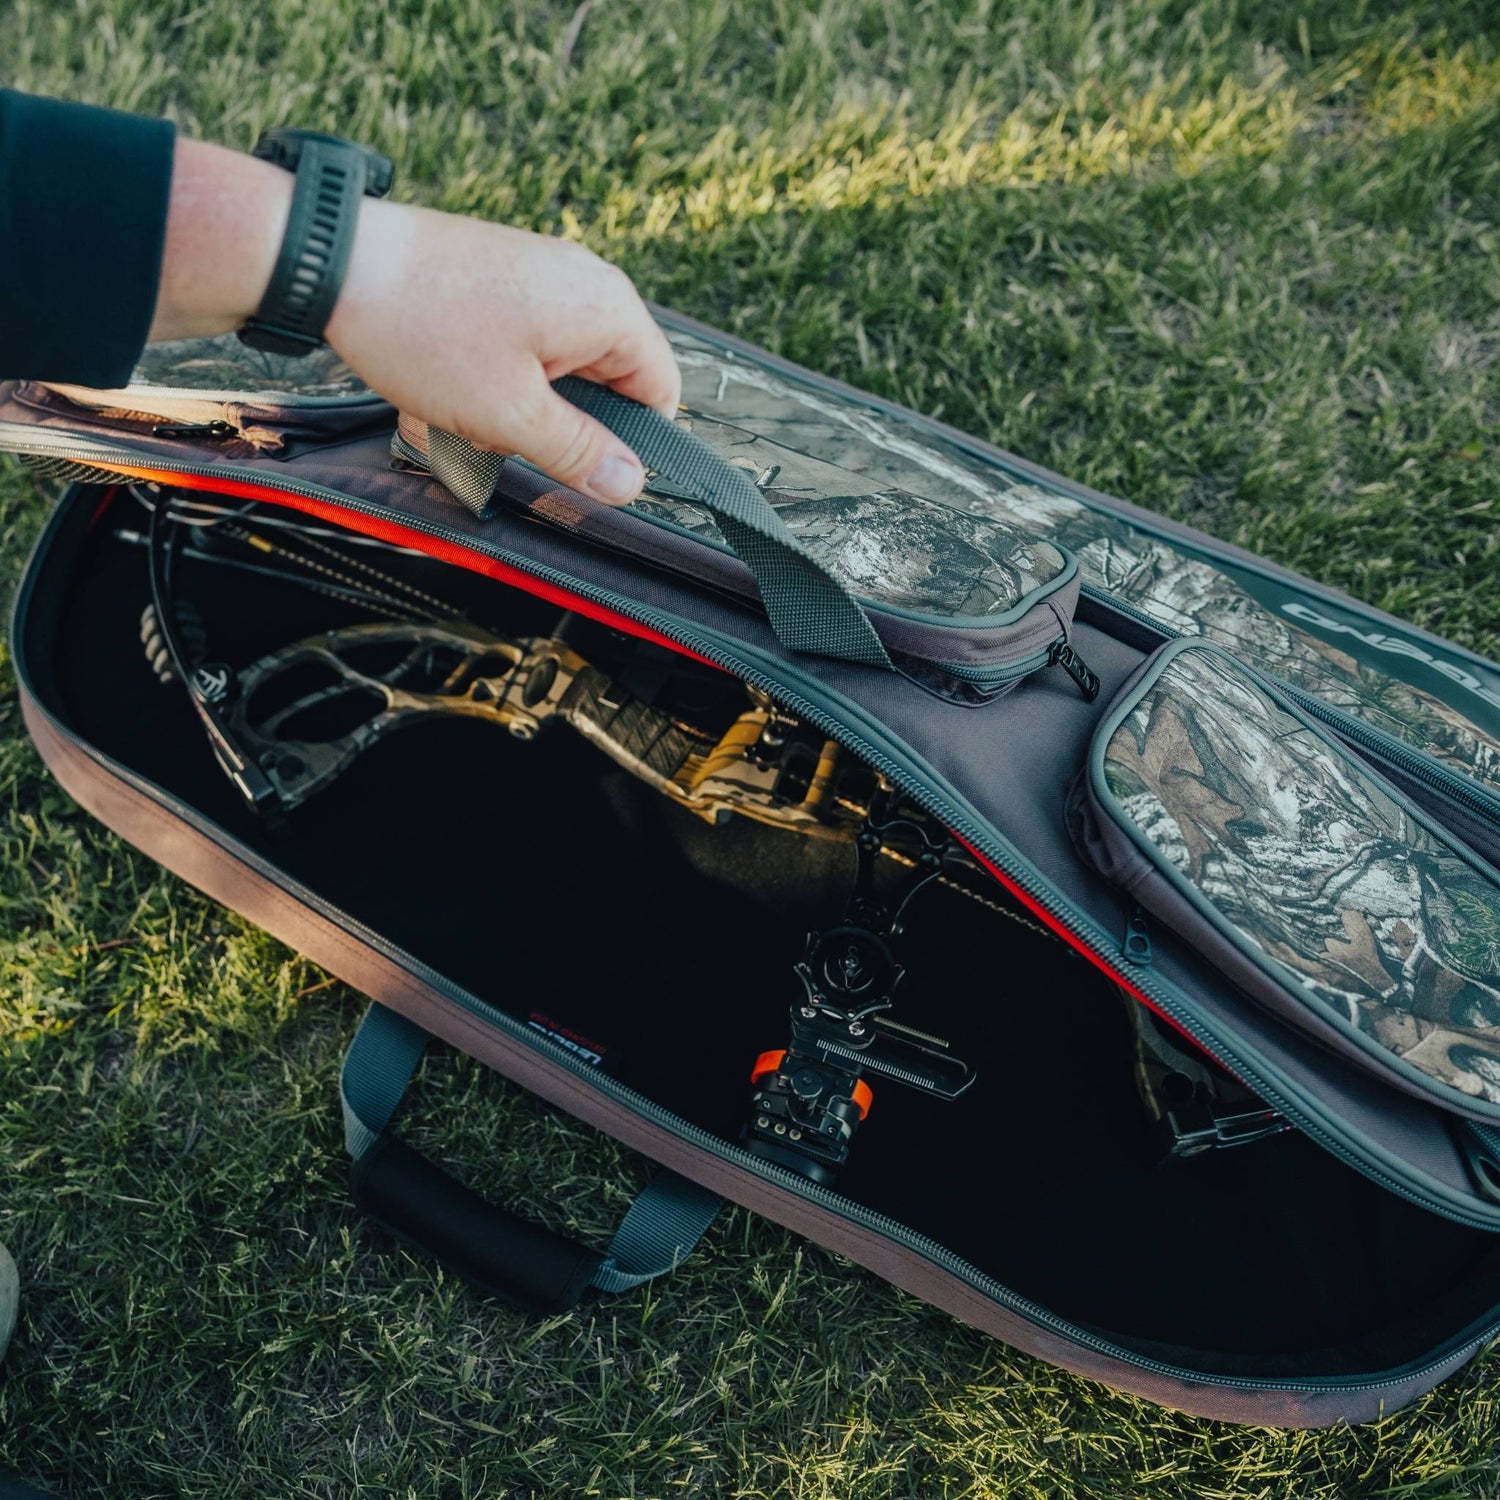 Get your gear safely to the field with the lightweight and durable Crusader Bow Case